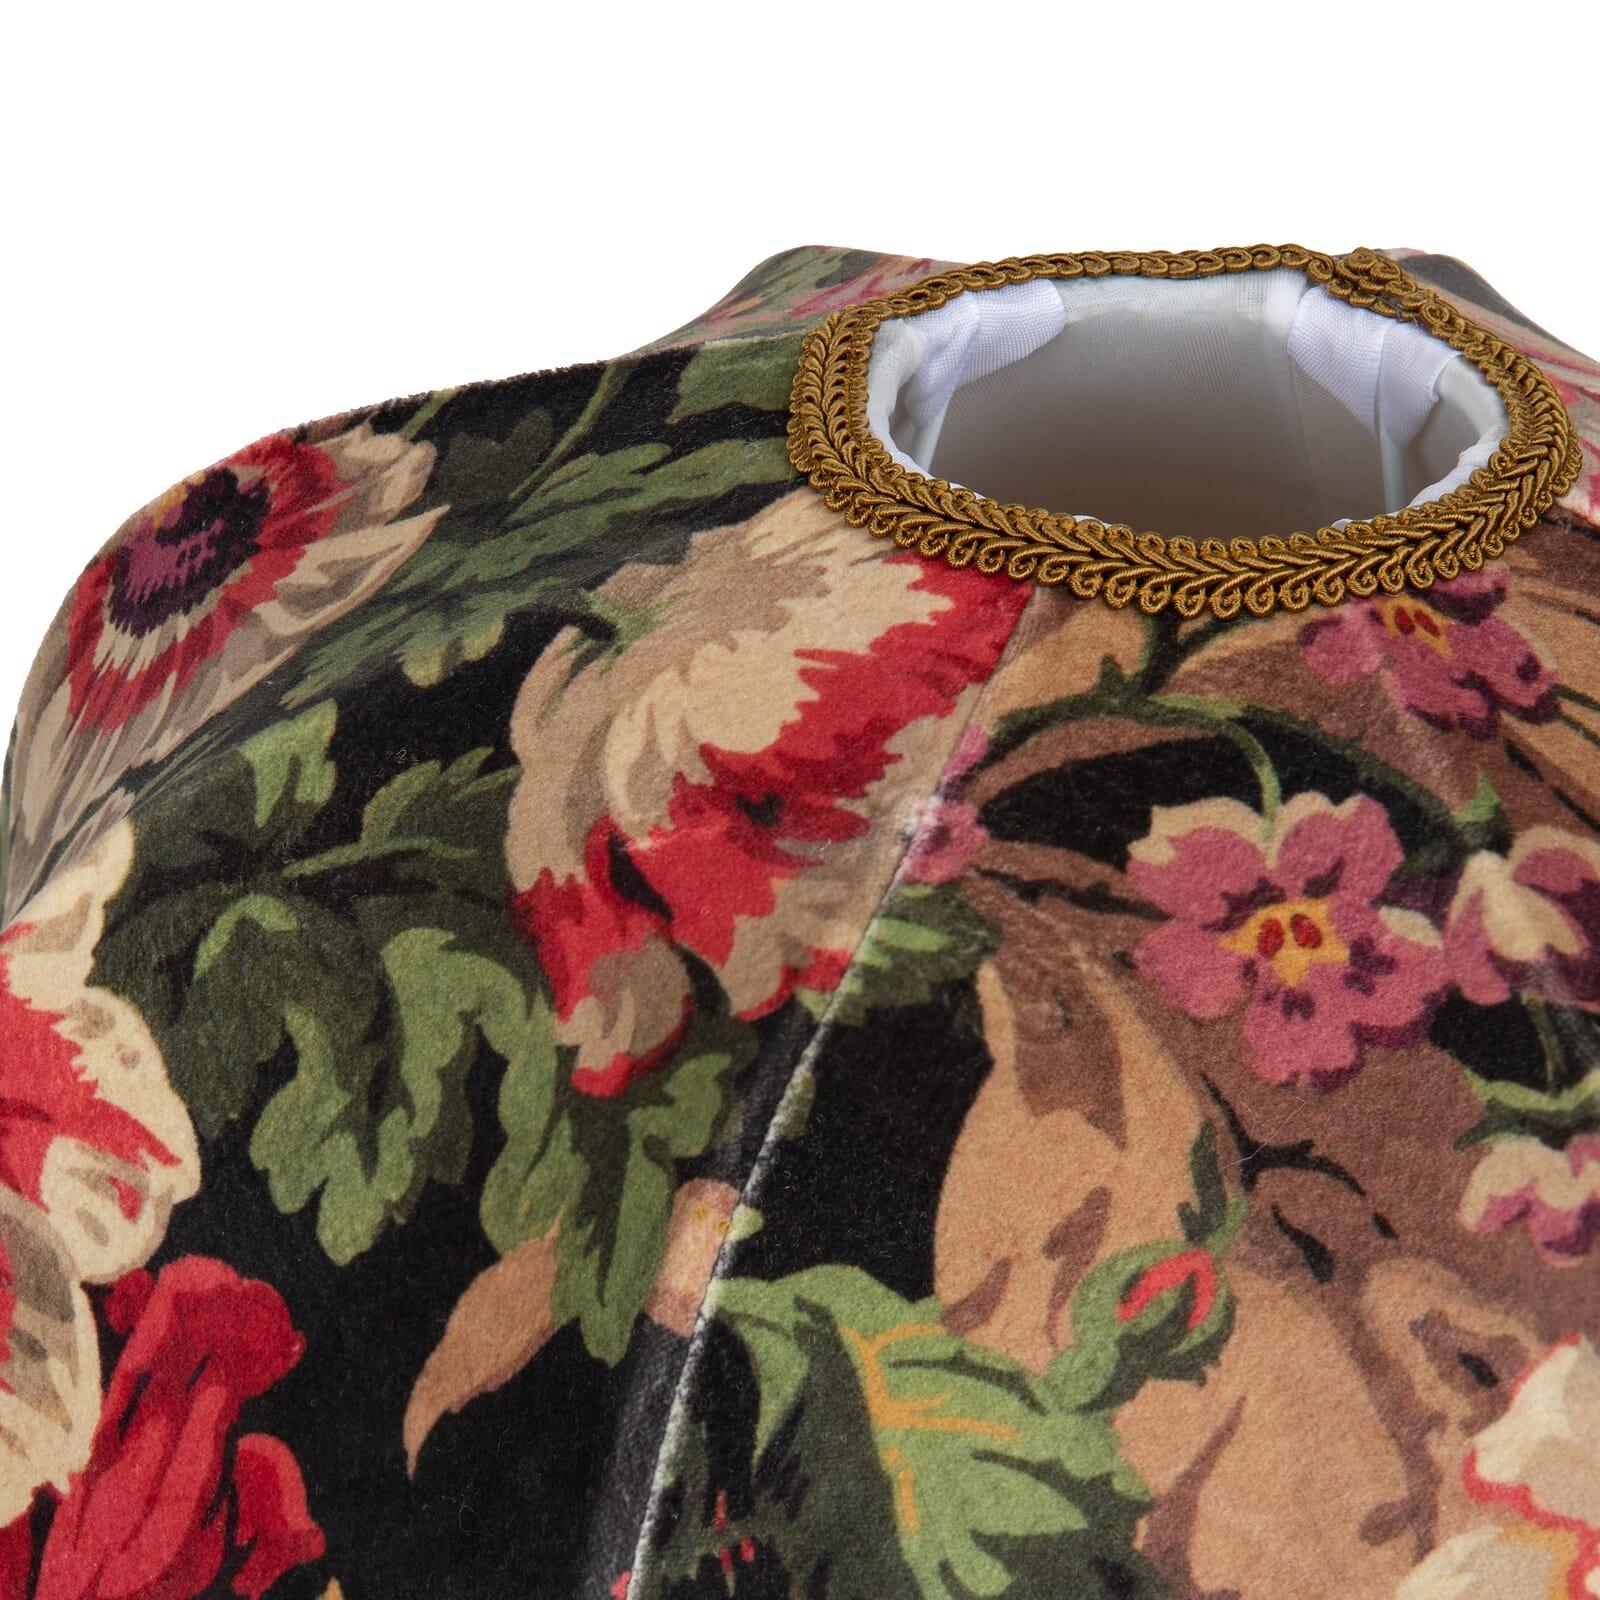 Add a touch of floral finesse to your home with the FLORESCENSE lampshade in dark and decadent black velvet. Handcrafted to order, this Victorian shaped beauty would look especially chic paired with one of our standout lamp bases.

Please note that